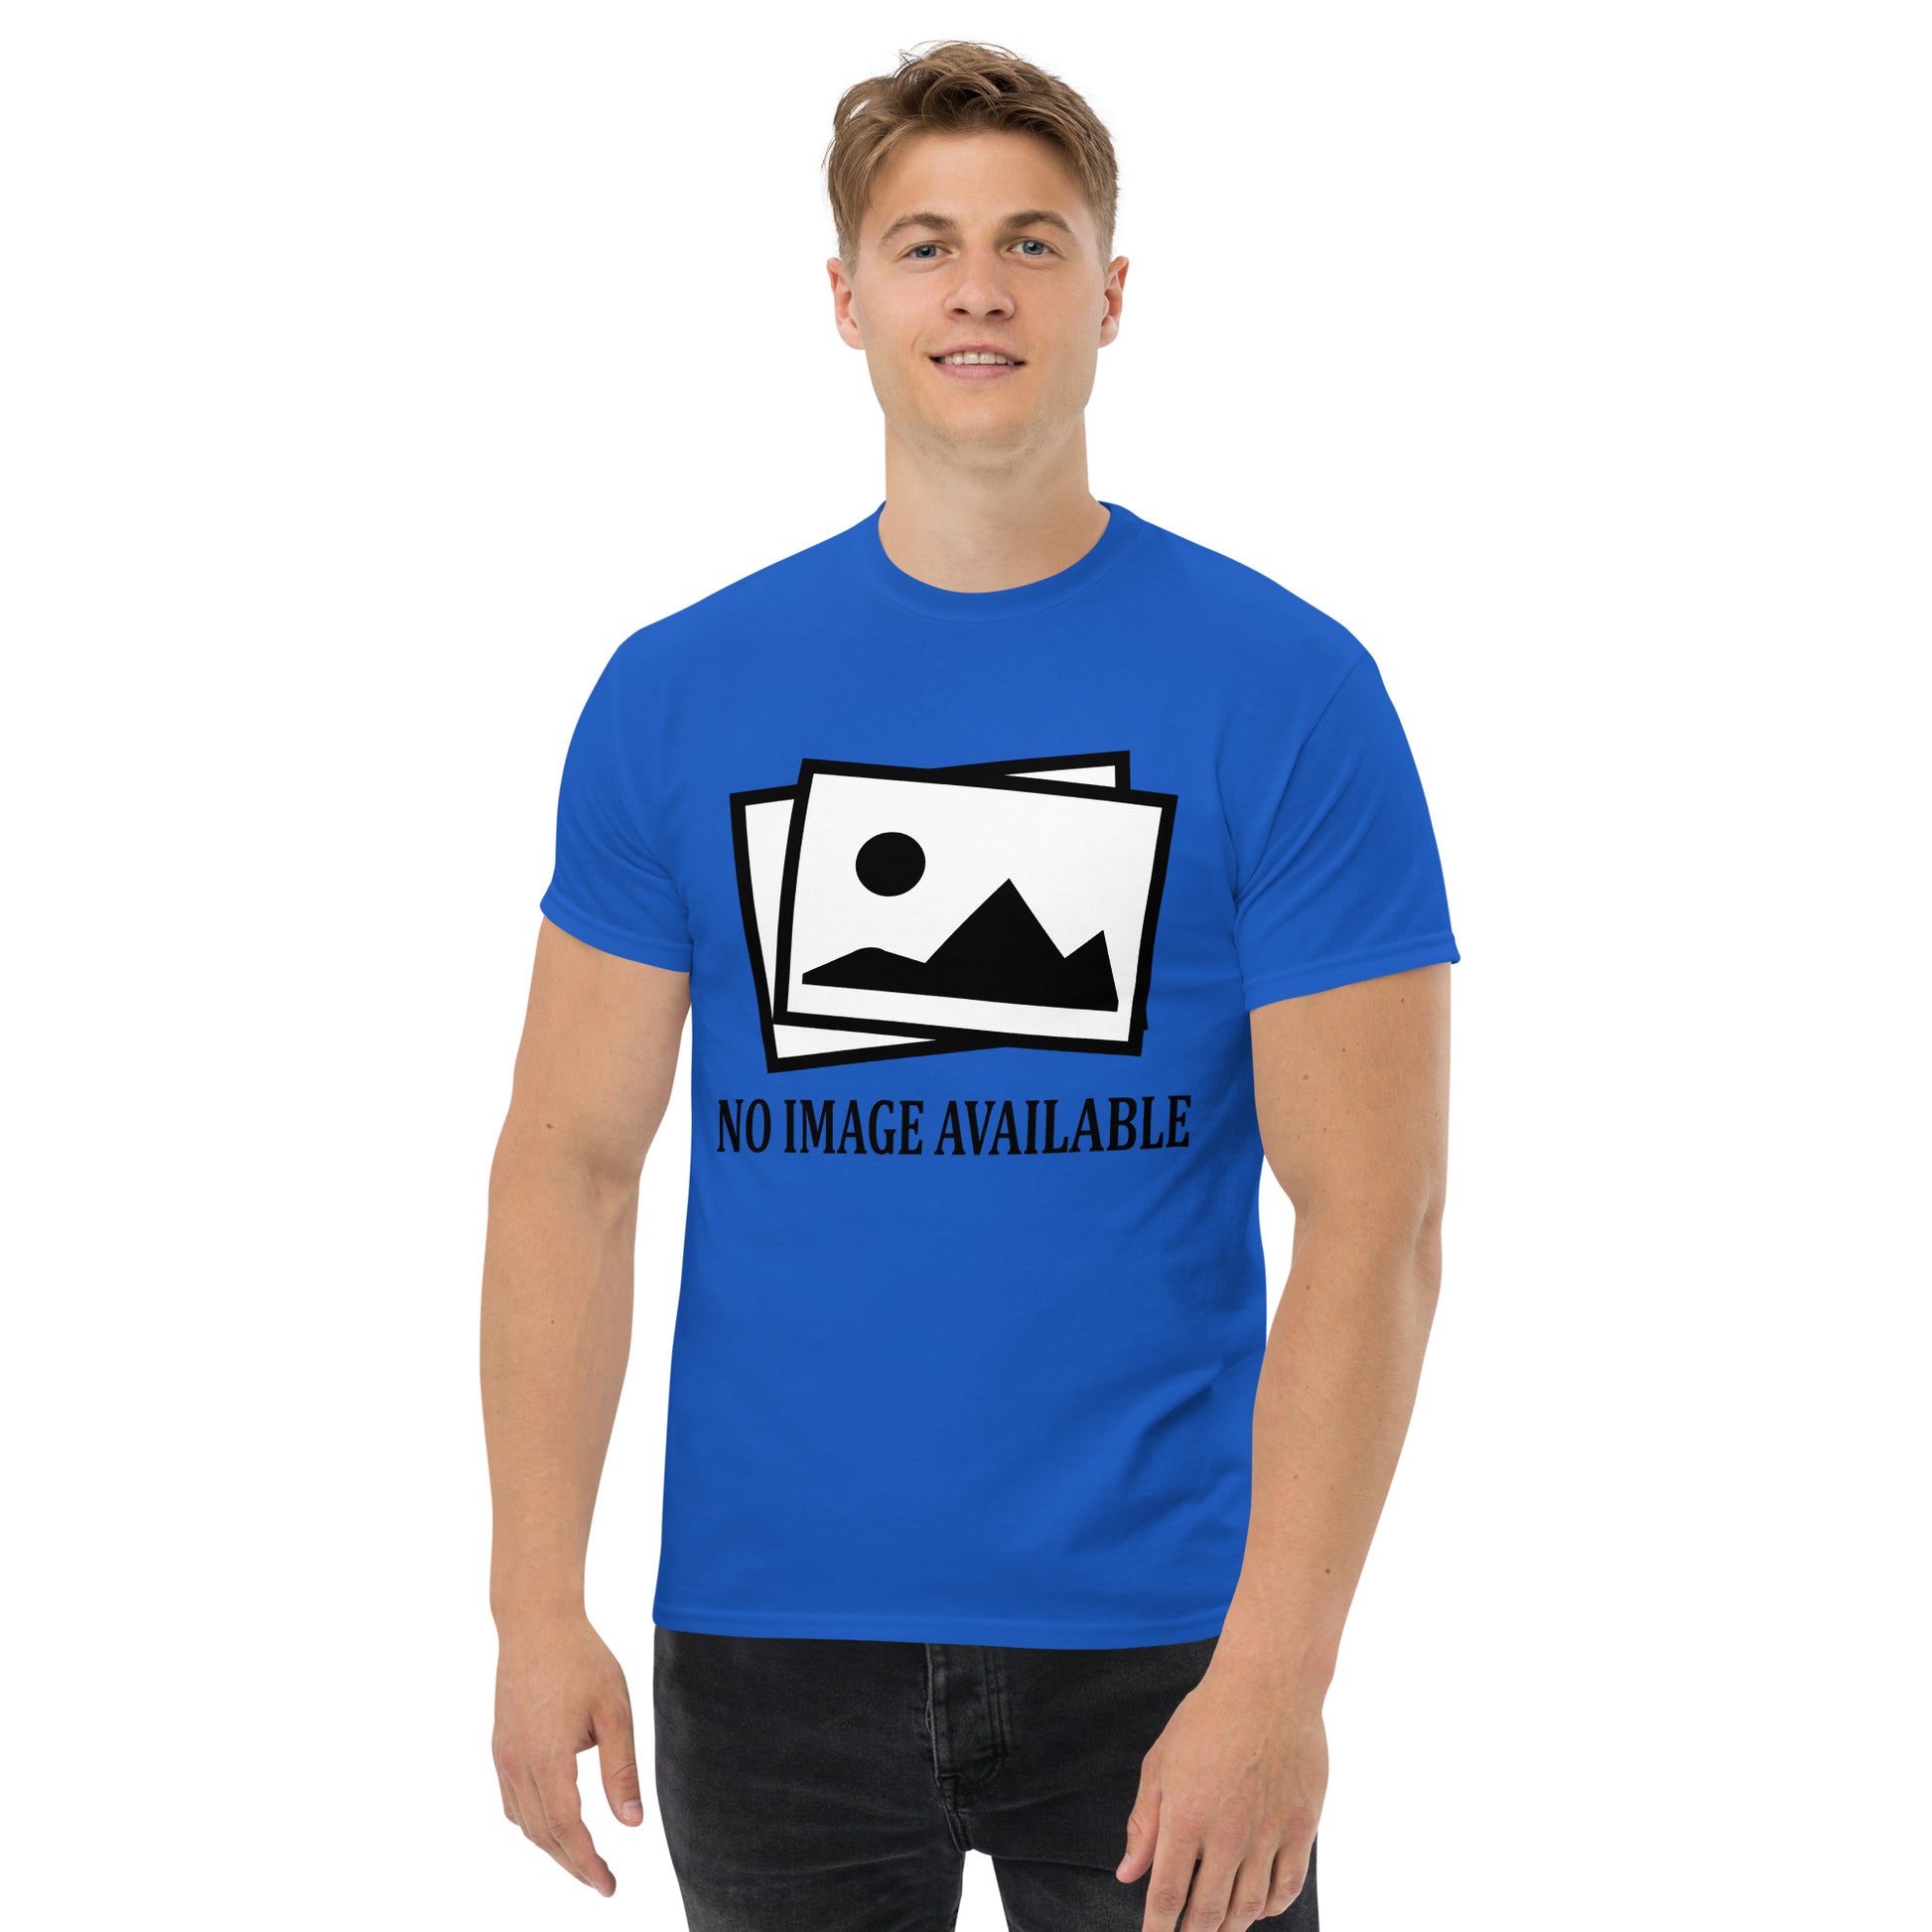 Men with royal blue t-shirt with image and text "no image available"